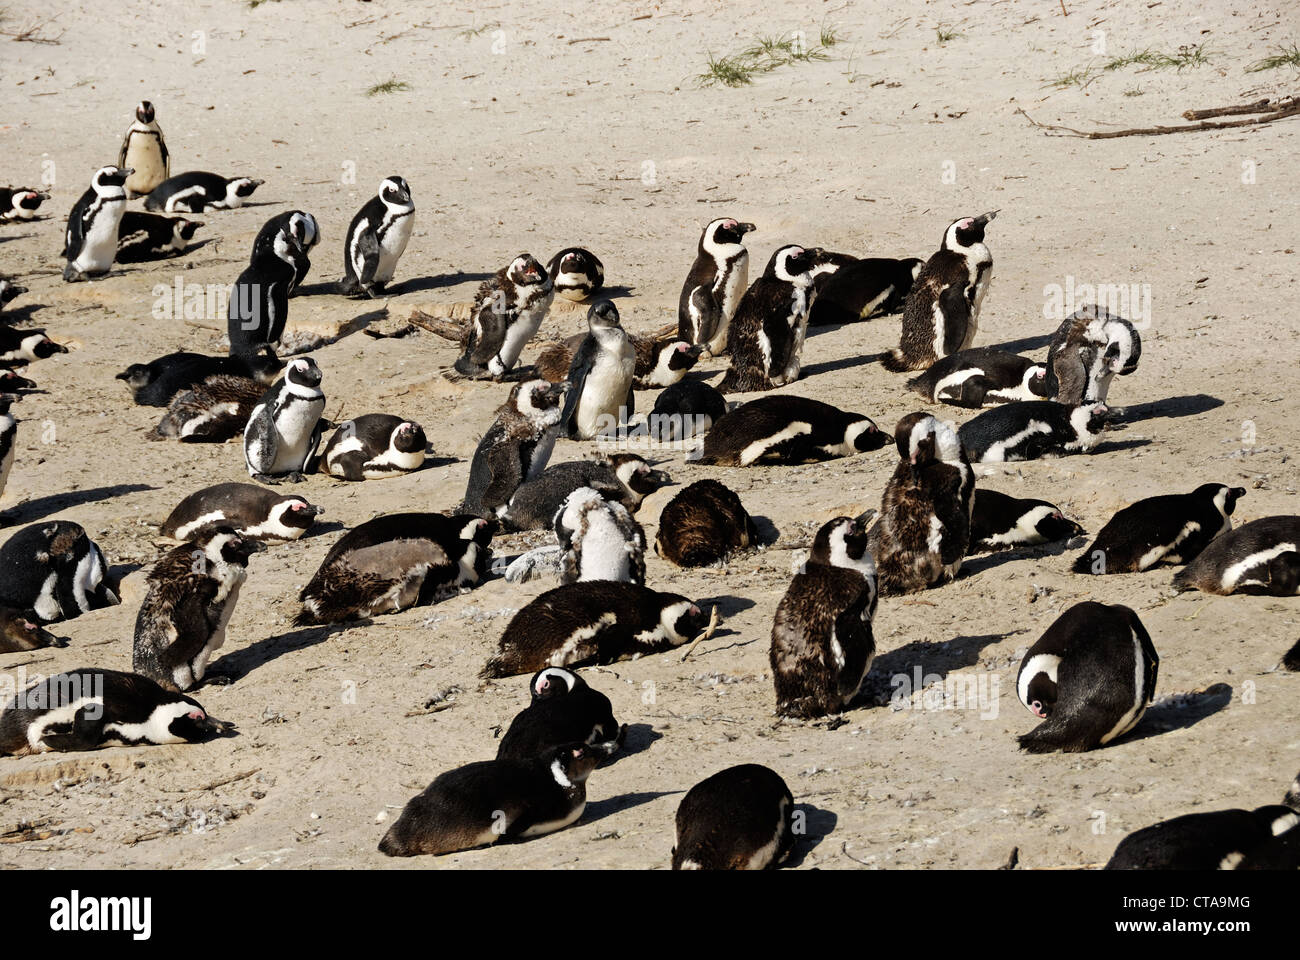 Black Footed Jackass Penguins - Speniscus demersus - on Boulders Beach, Simon's Town, South Western Cape, South Africa Stock Photo